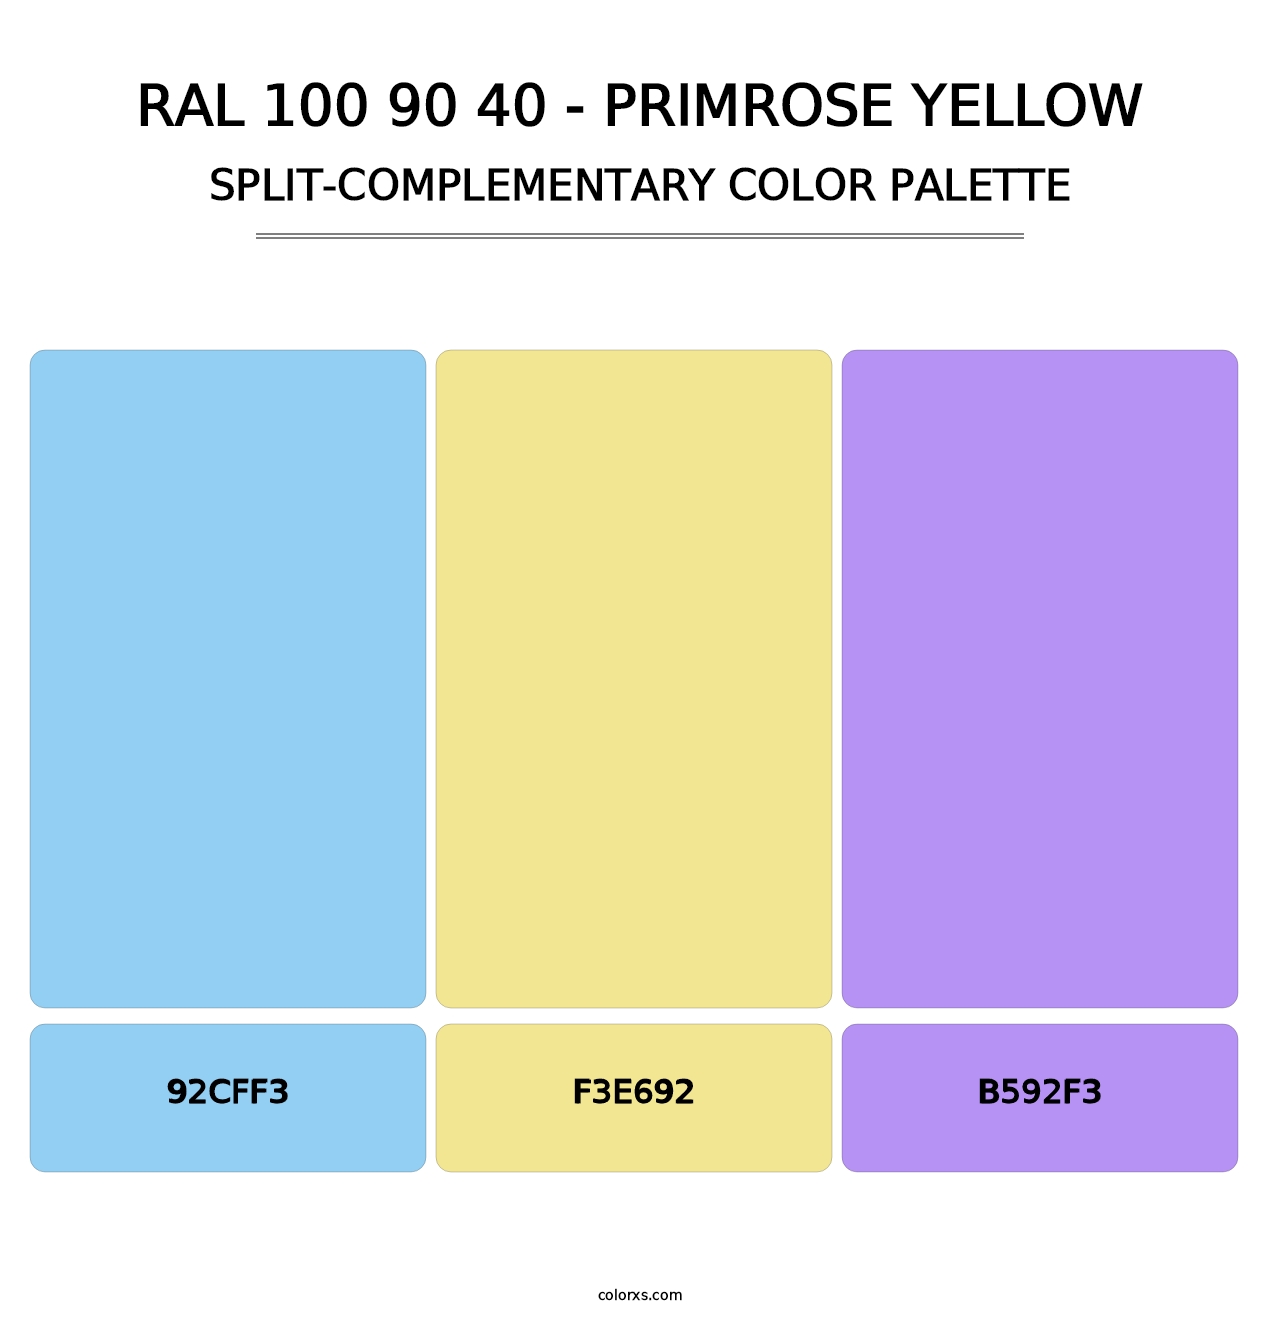 RAL 100 90 40 - Primrose Yellow - Split-Complementary Color Palette